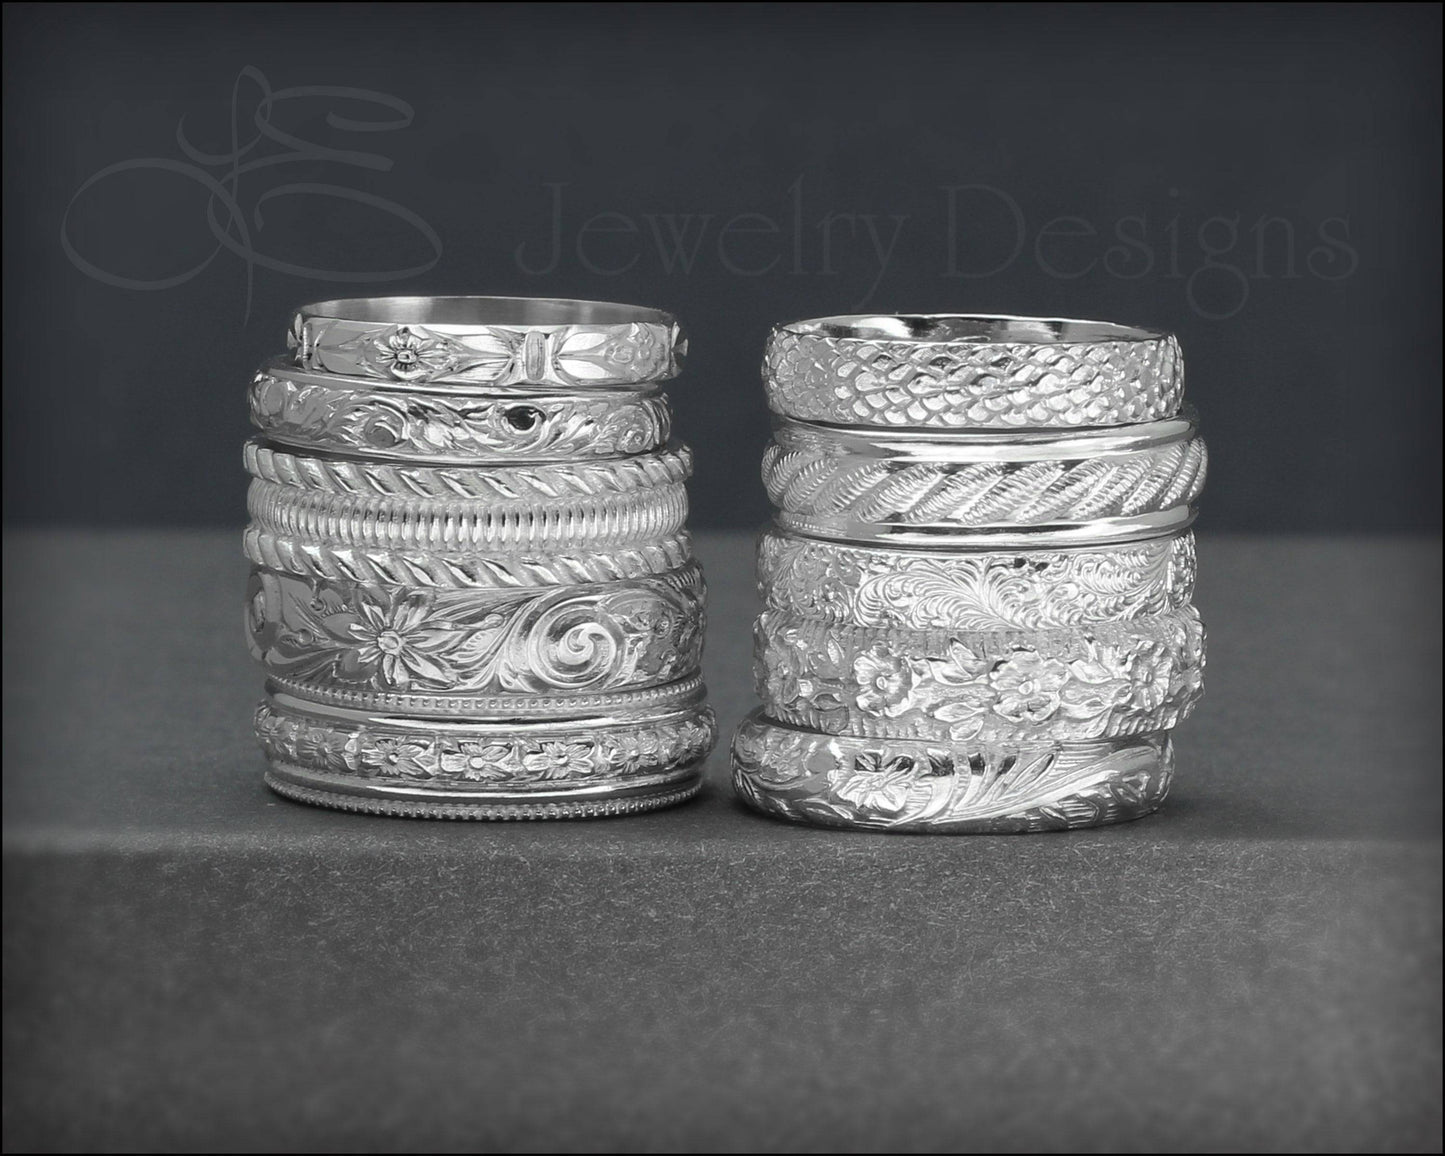 Load image into Gallery viewer, Sterling Pattern Bands - LE Jewelry Designs
